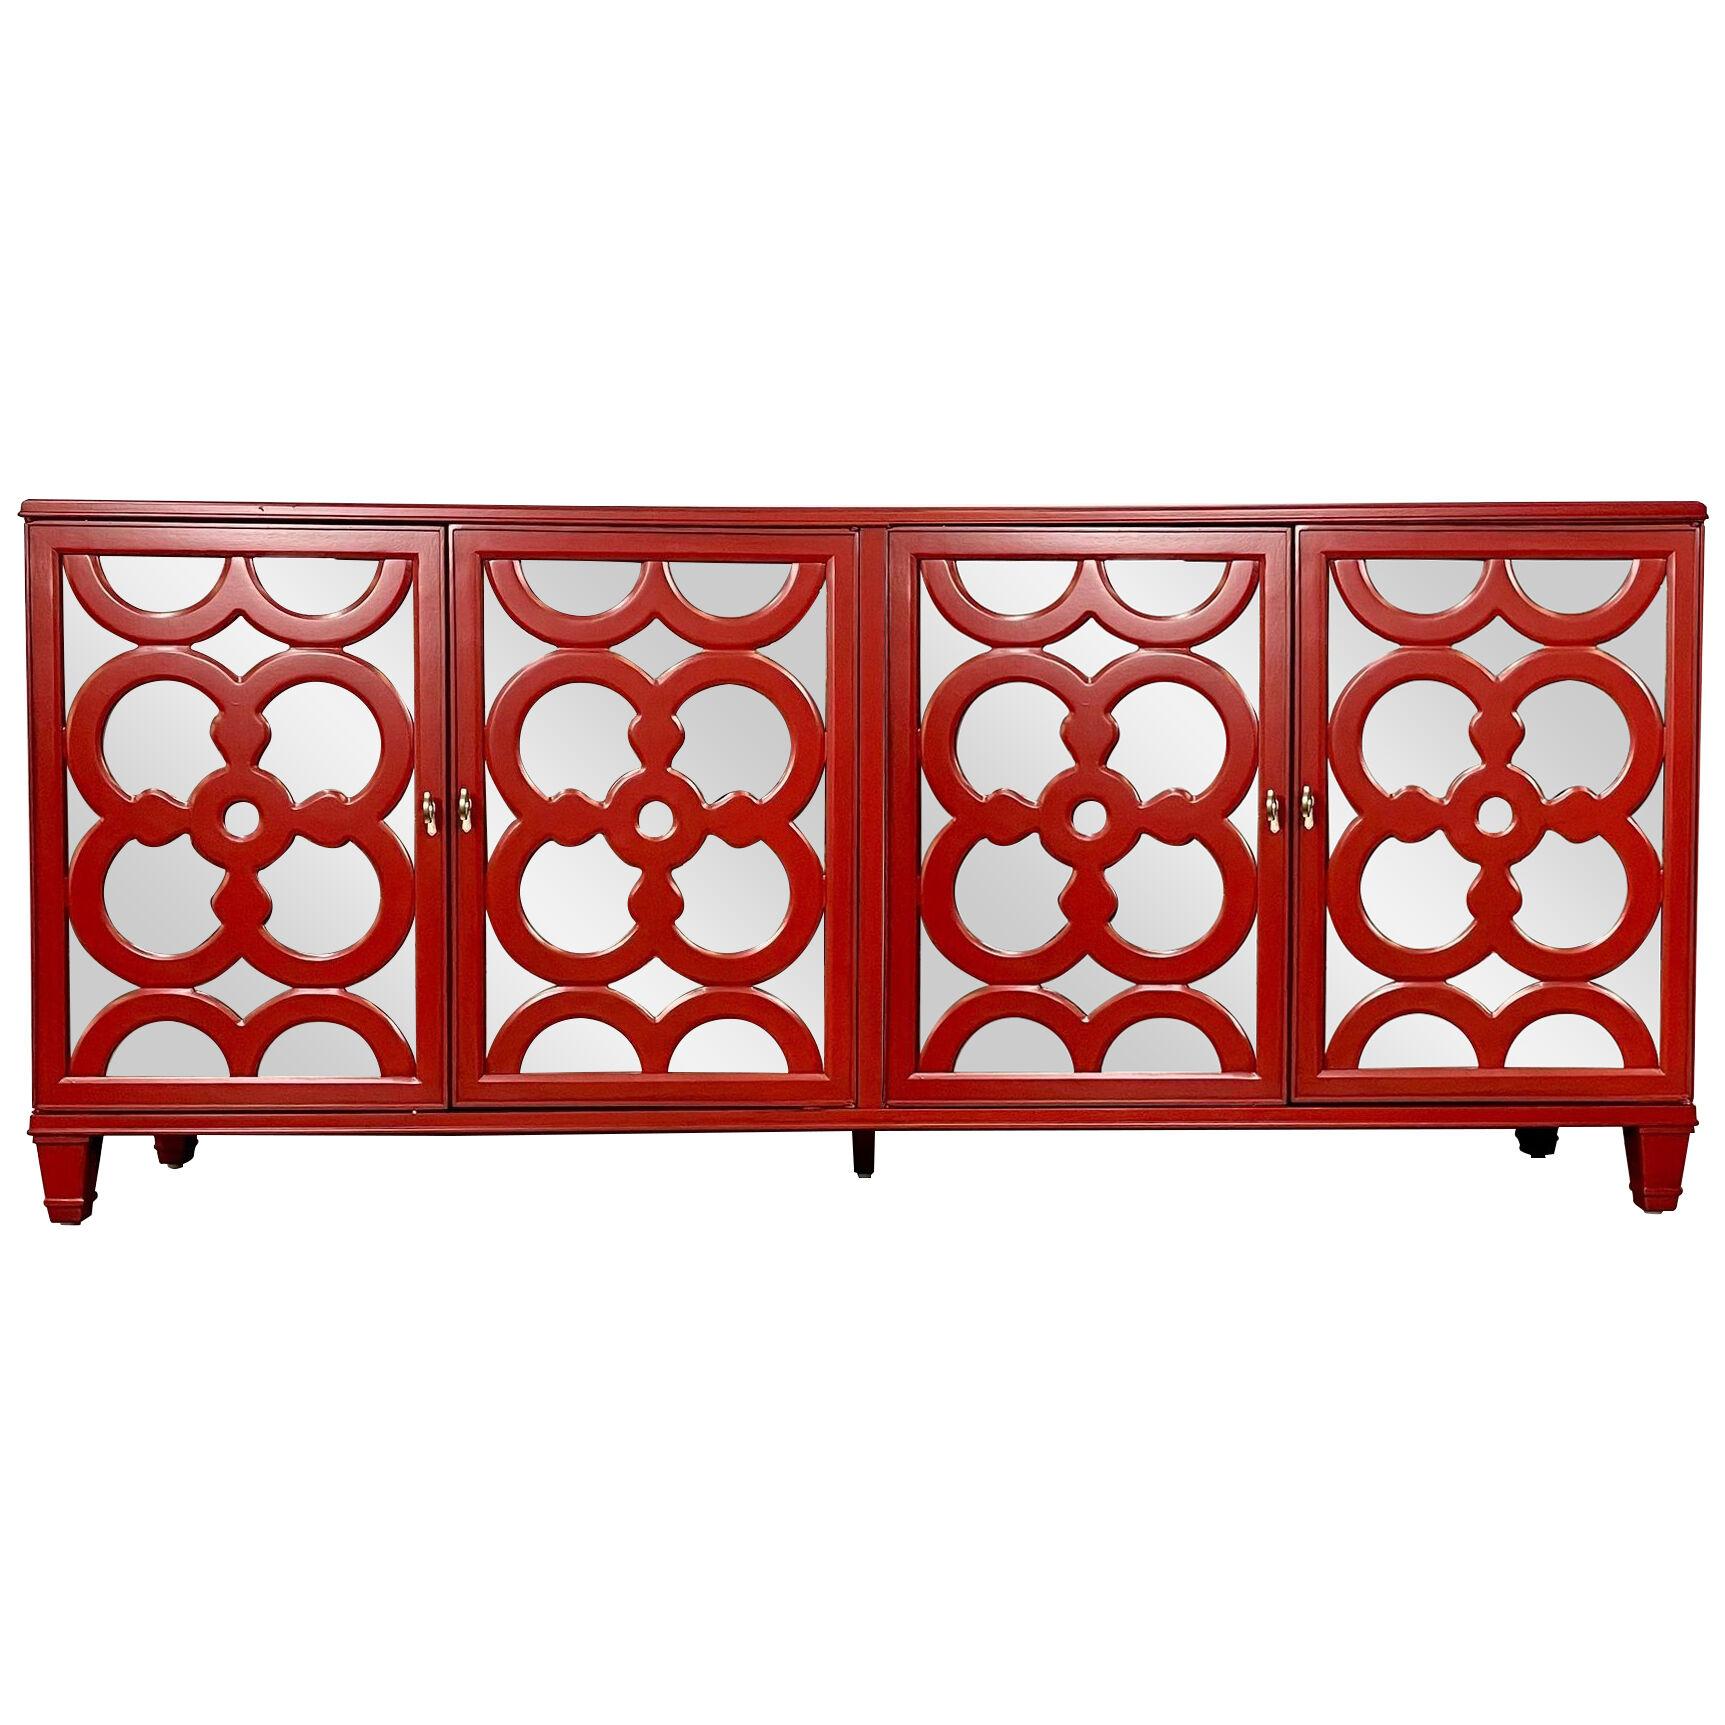 Modern Sideboard, Dresser or Chest, Red Lacquered, Mirrored.